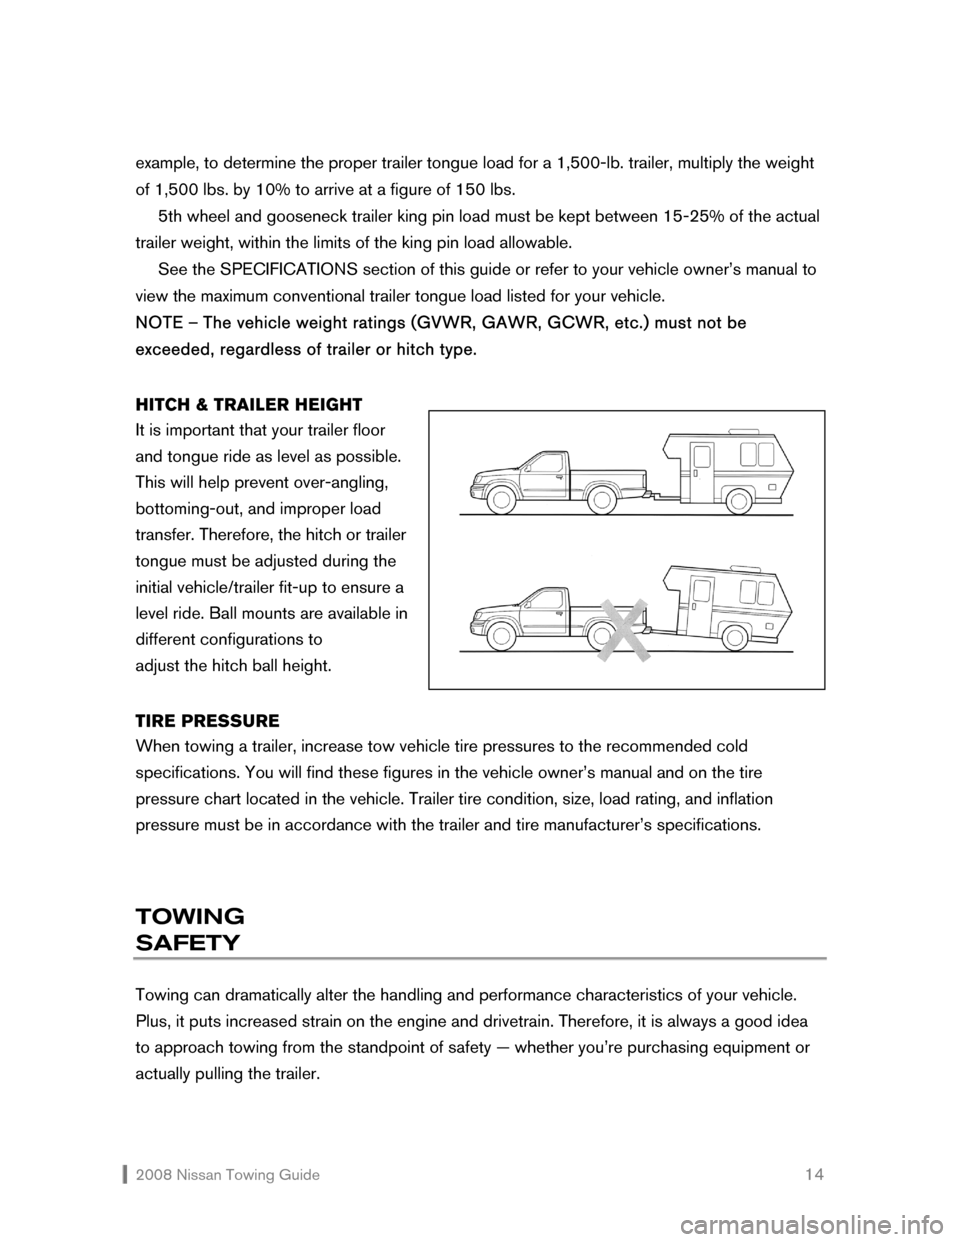 NISSAN ARMADA 2008 1.G Towing Guide  2008 Nissan Towing Guide    14 example, to determine the proper trailer tongue load for a 1,500-lb. trailer, multiply the weight 
of 1,500 lbs. by 10% to arrive at a figure of 150 lbs.  
  5th wheel 